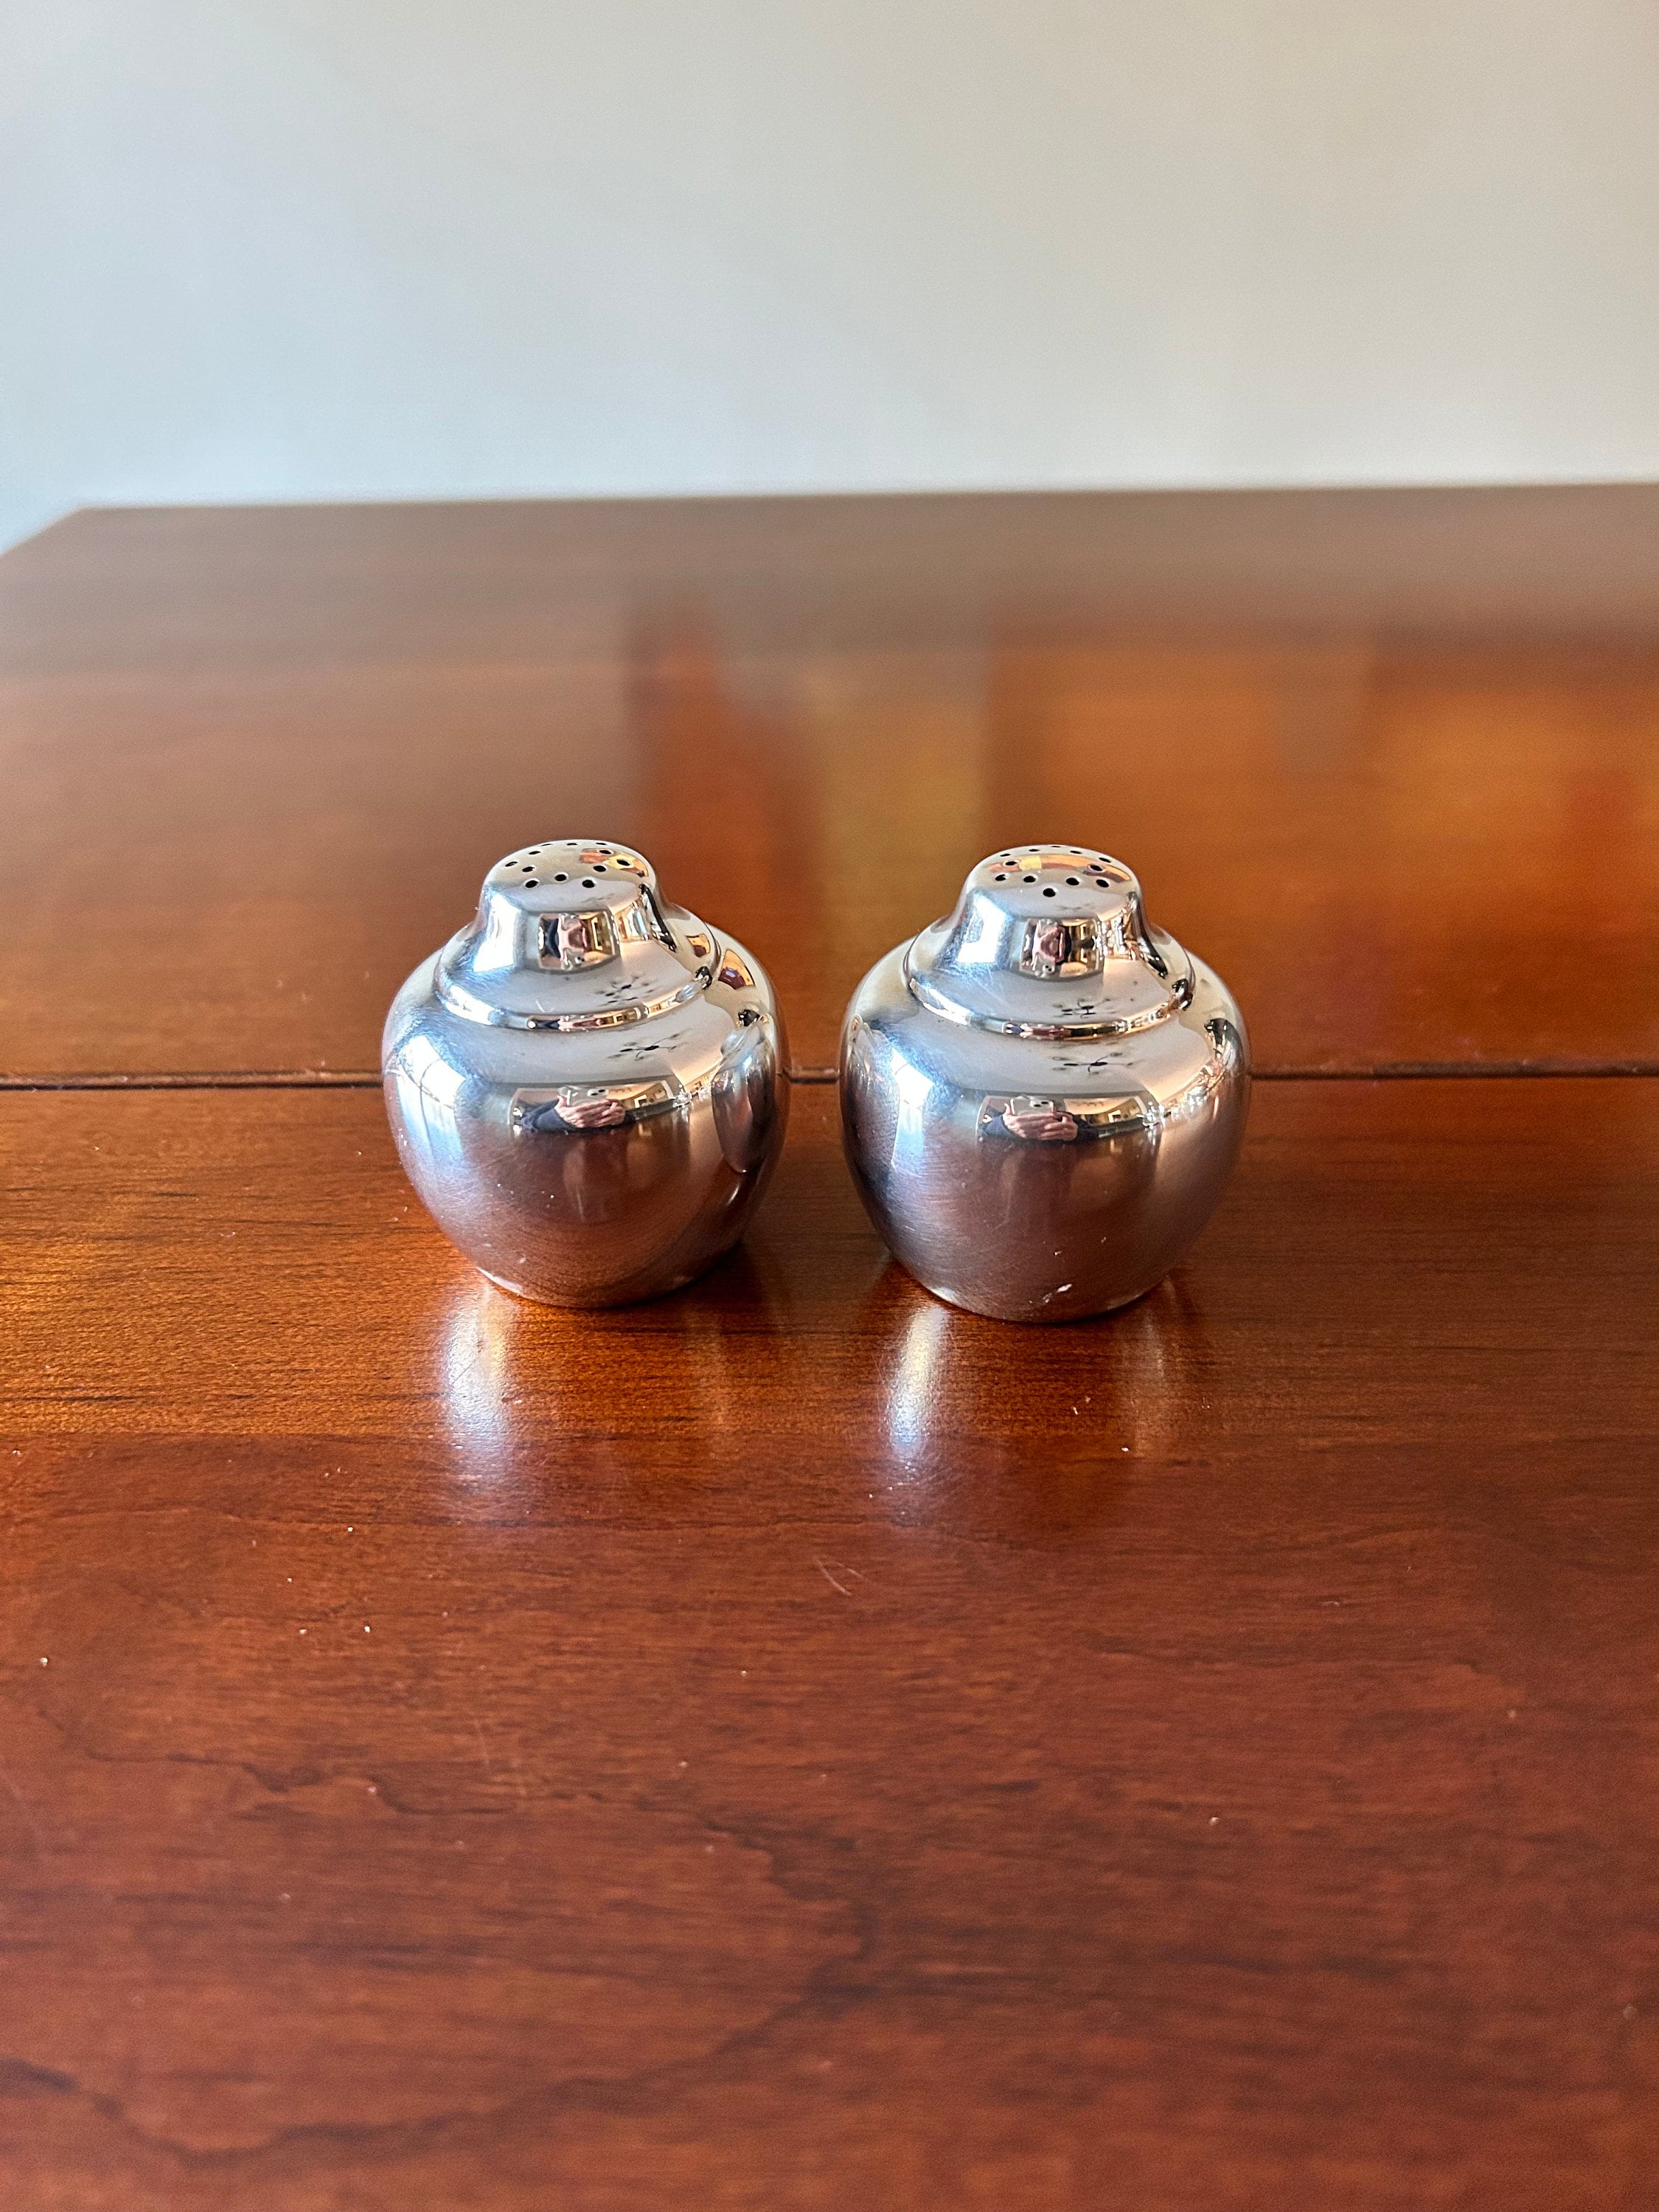 DANSK Silverplated and Weighted Salt & Pepper Shakers /hgo – Pathway Market  GR